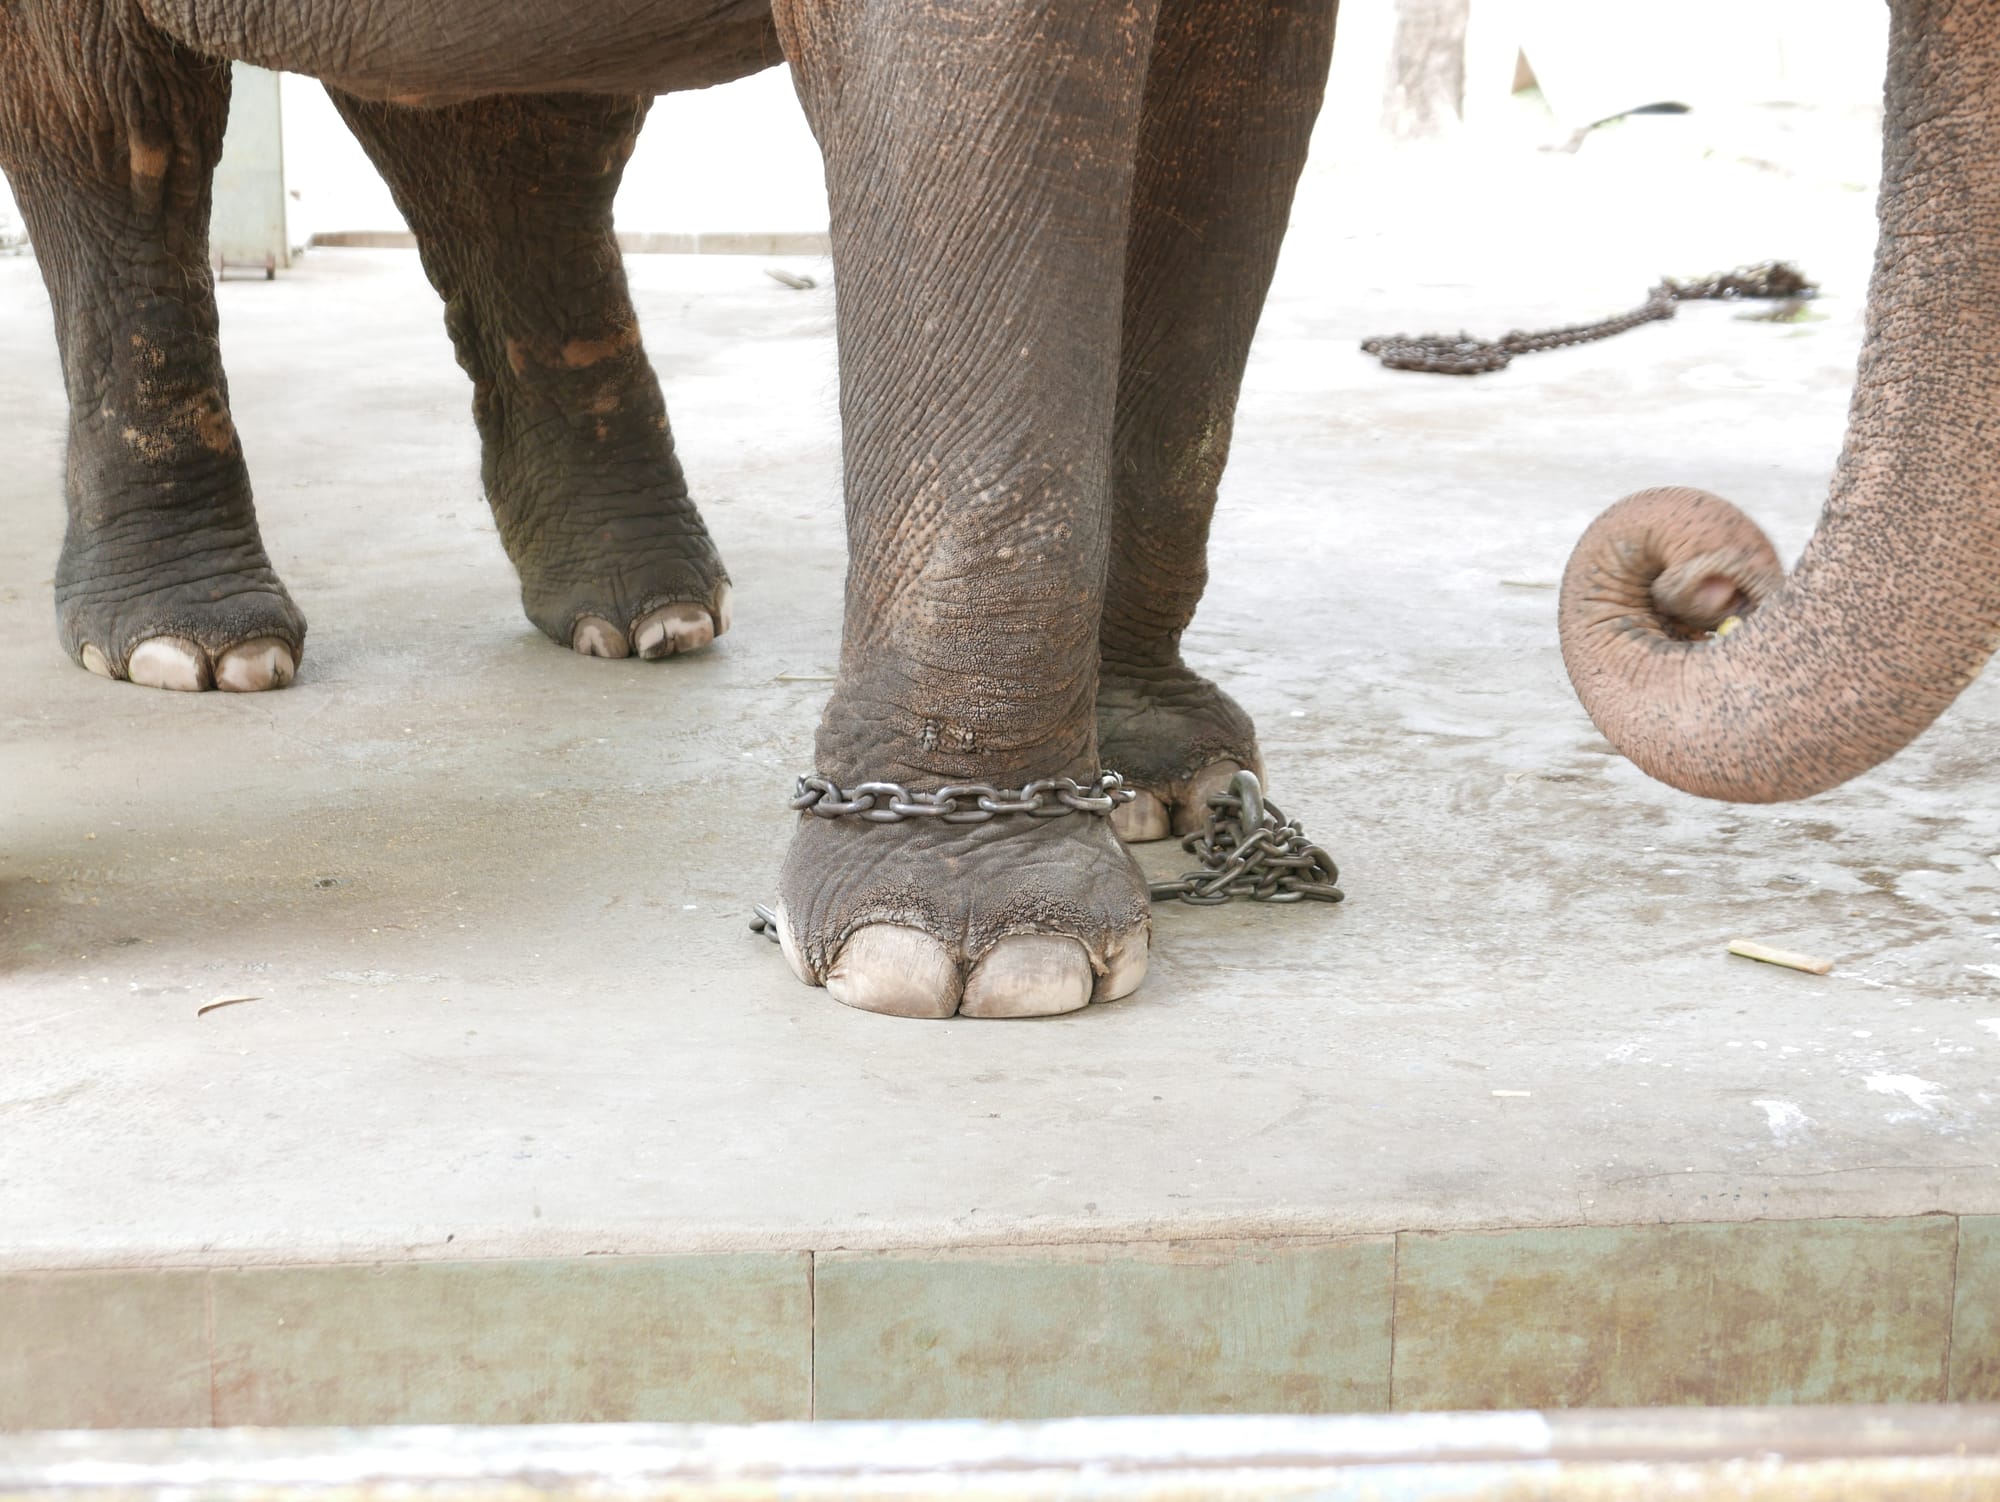 Photo by Author — chained elephant at Yadanabon Zoo, Mandalay, Myanmar